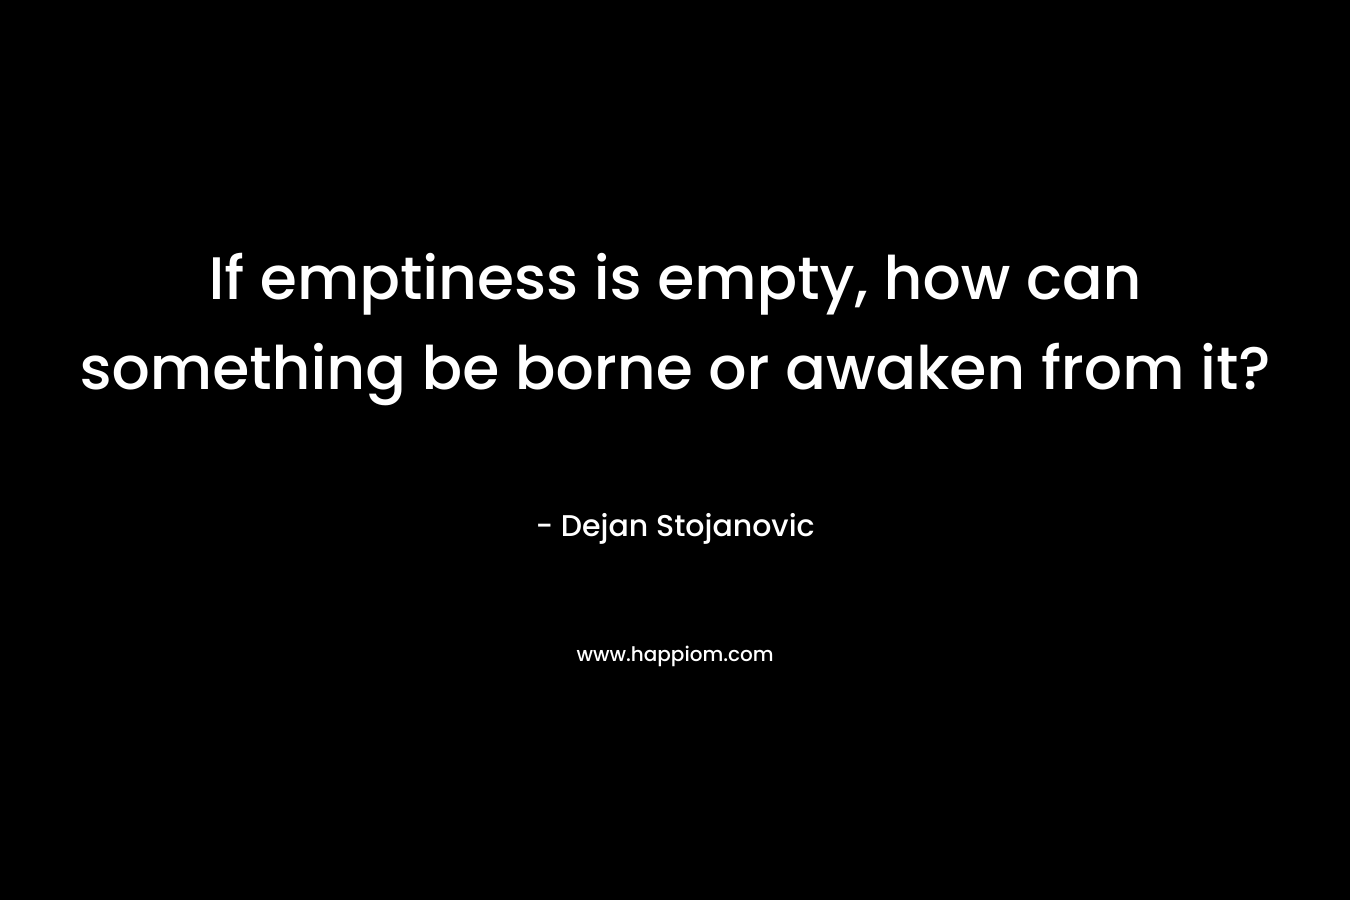 If emptiness is empty, how can something be borne or awaken from it?